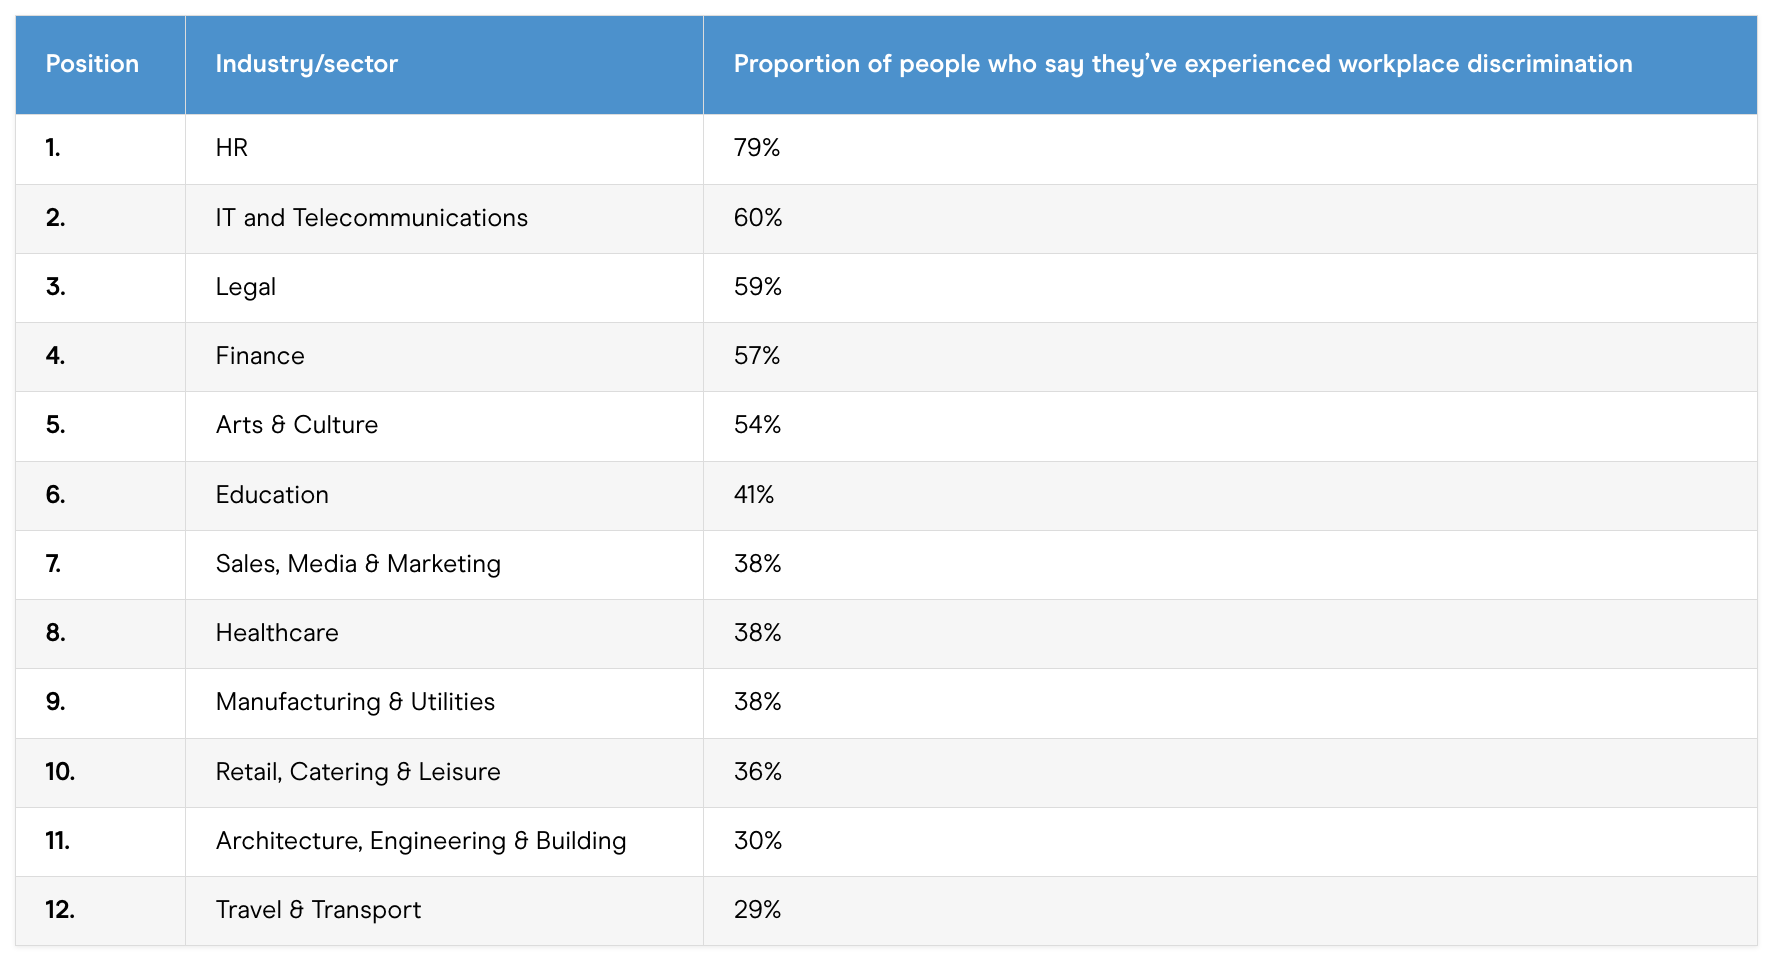 Which industries report the most workplace discrimination?